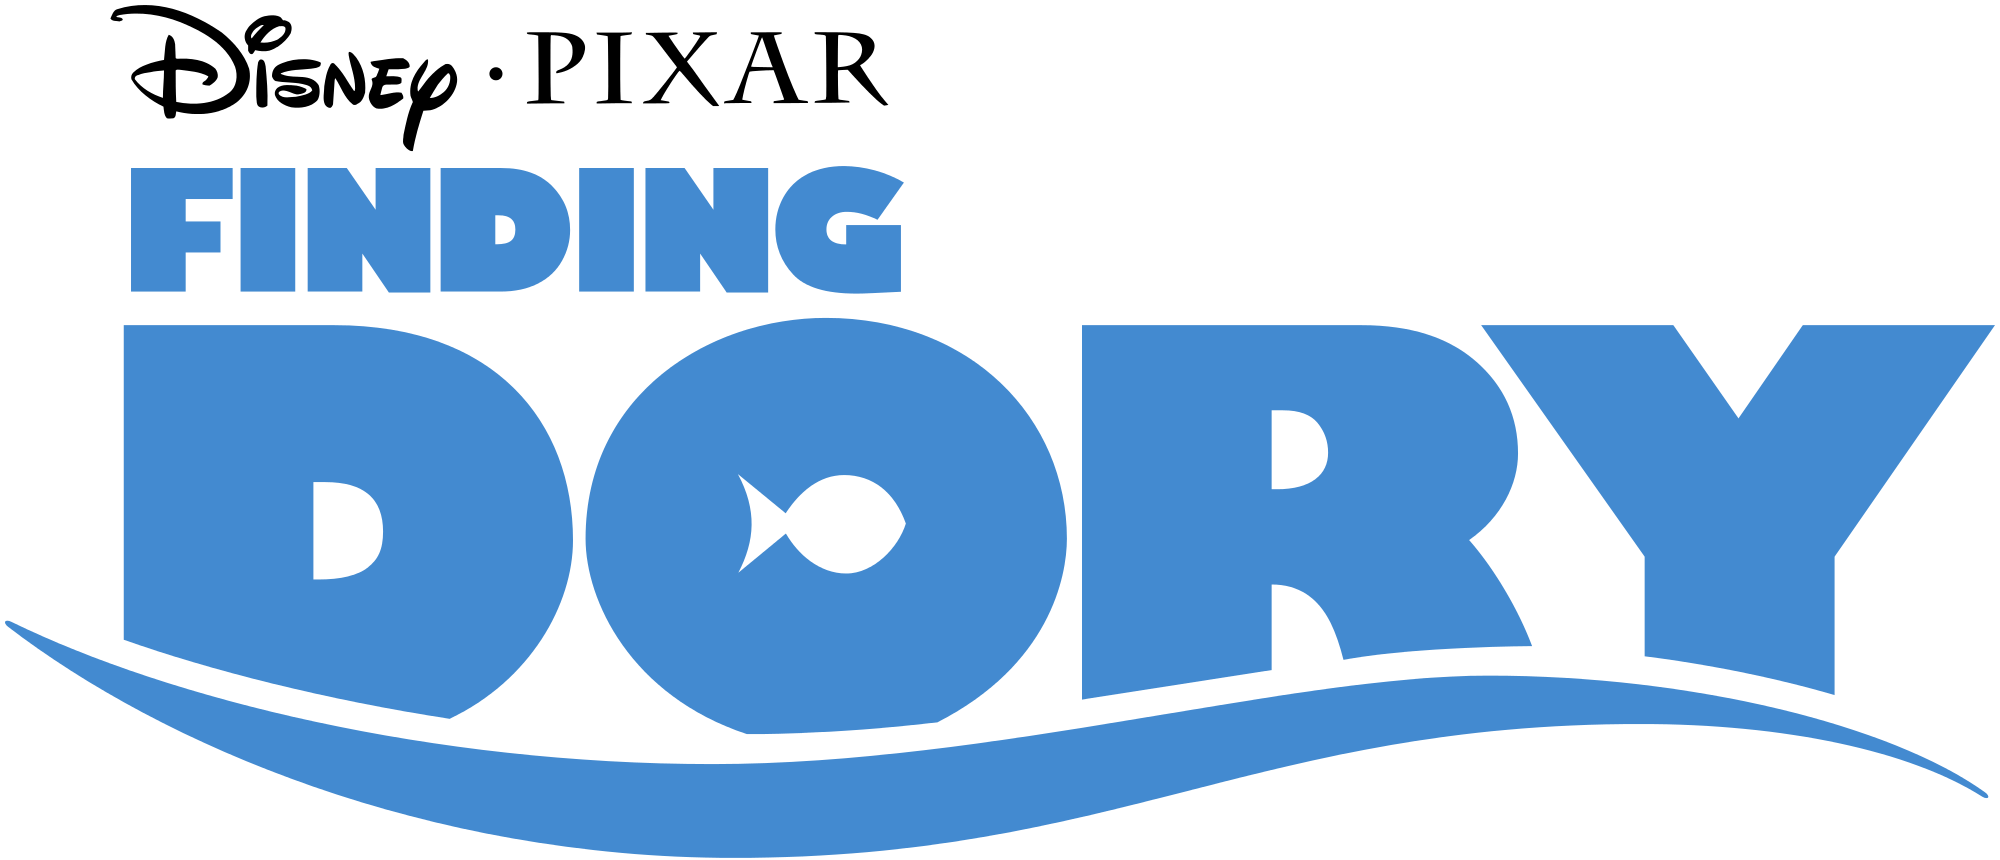 Disney Pixar Finding Nemo Logo - 101.7 The One | Here Are the Release Dates for the Sequels to ...